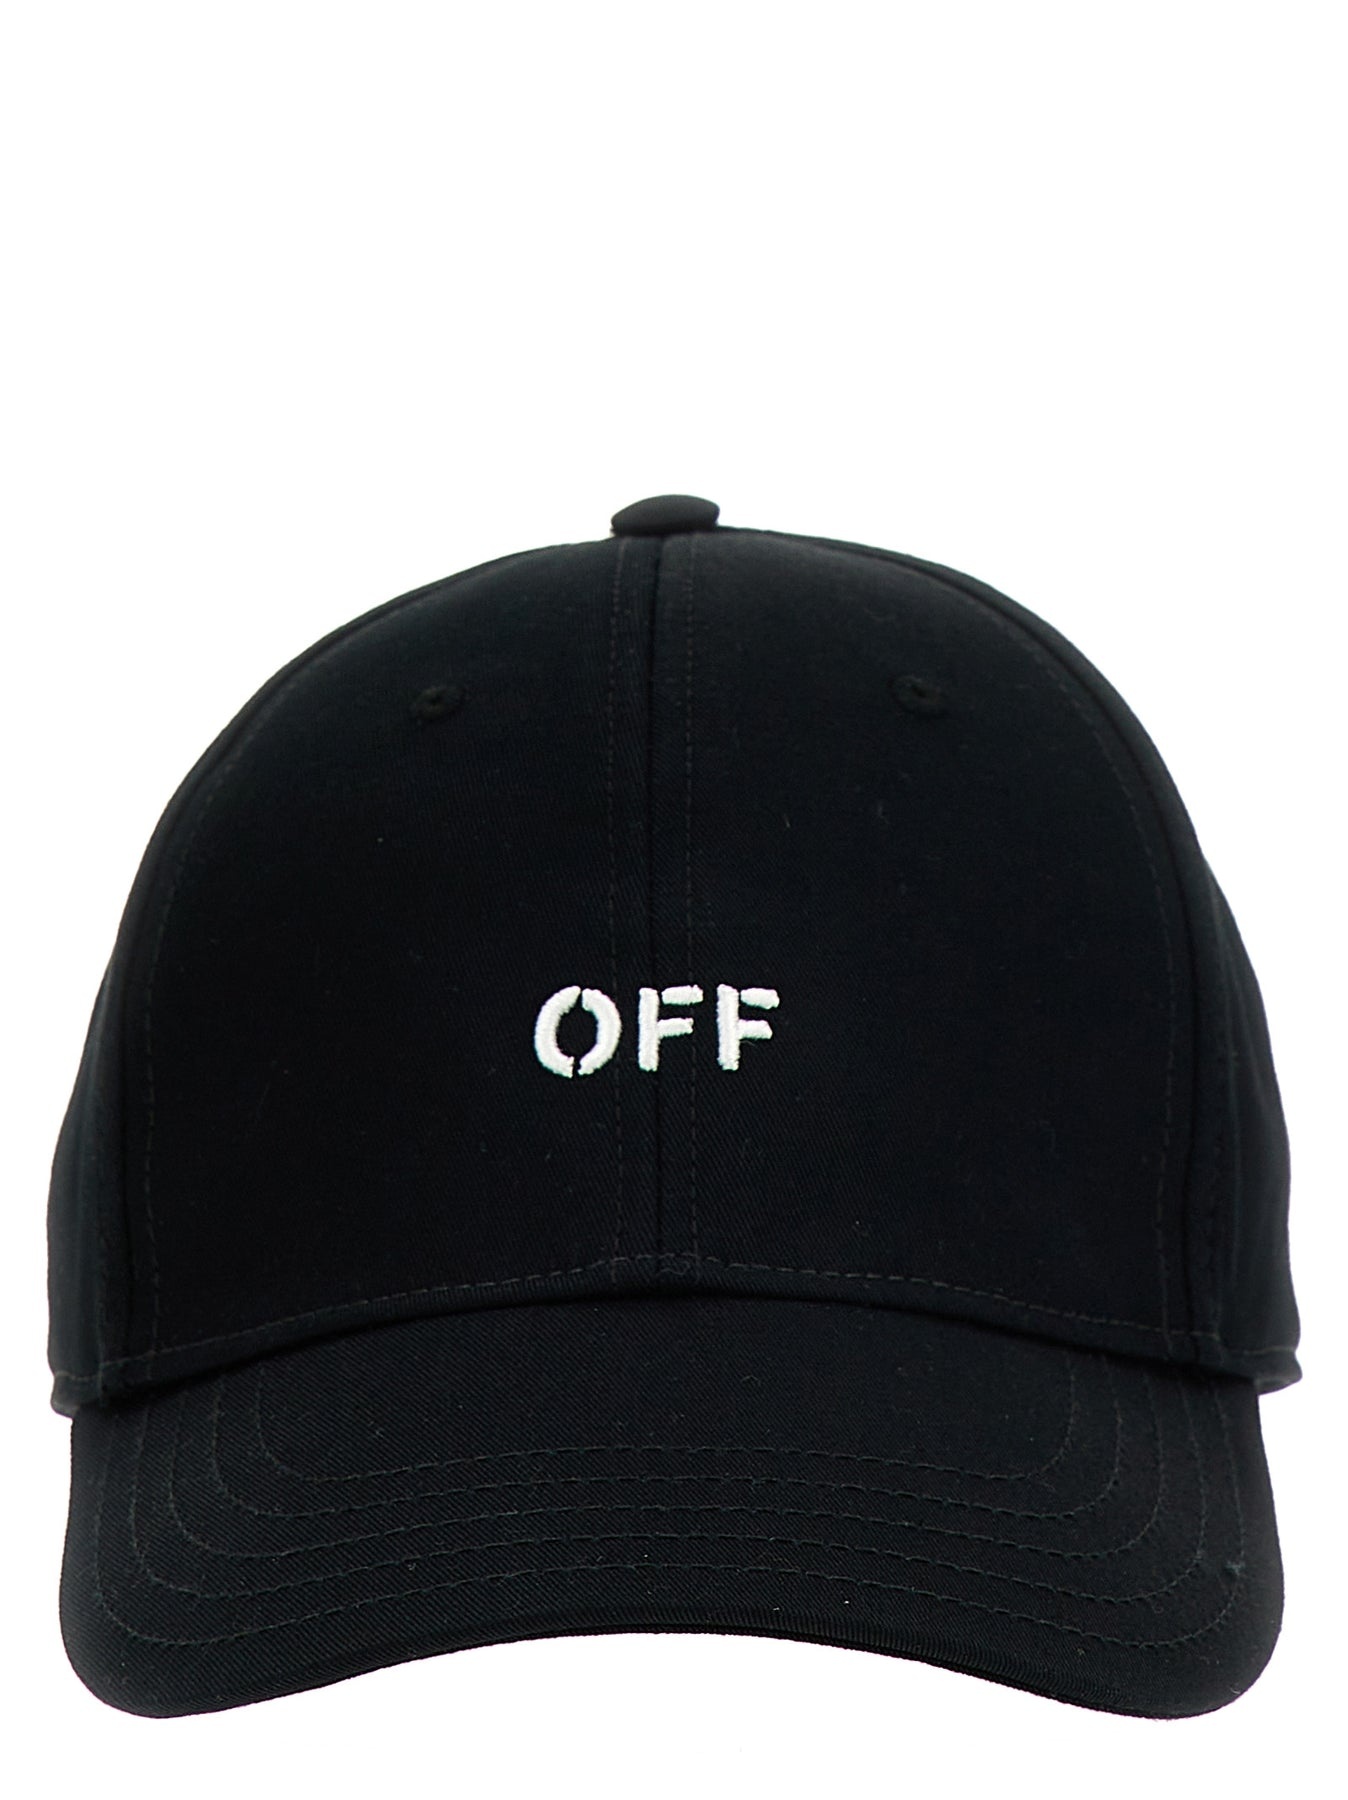 Drill Off Stamp Hats White/Black - 1